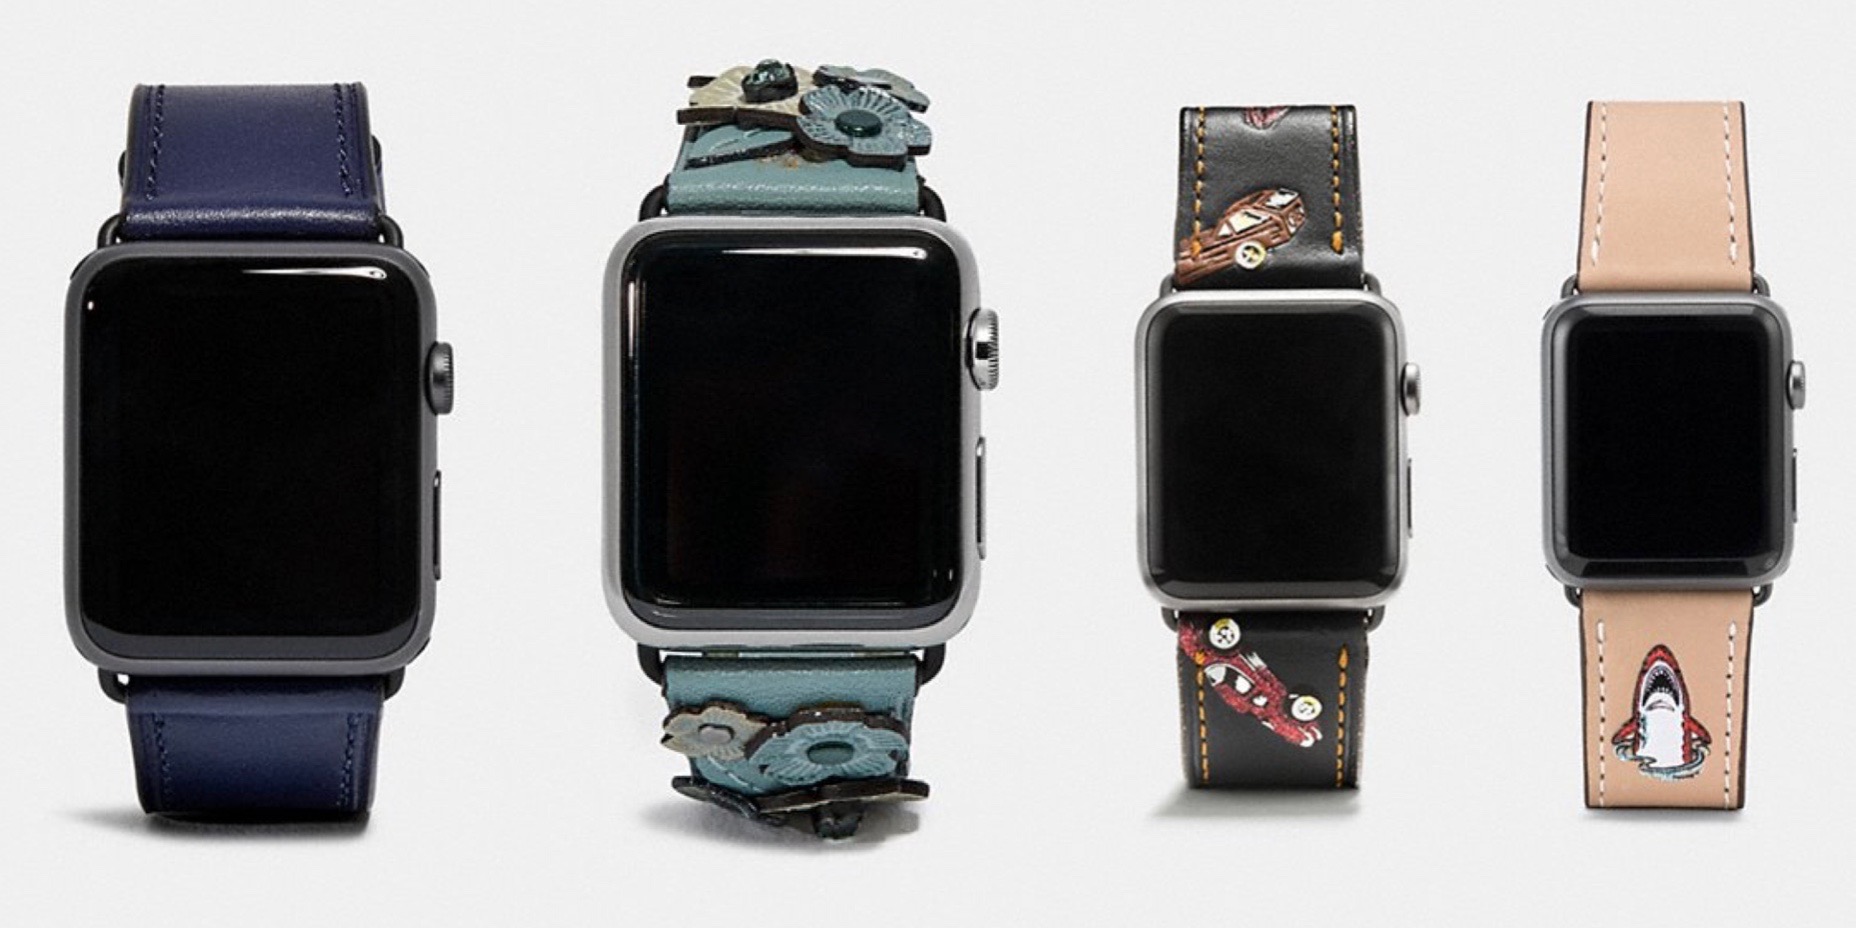 New Coach Apple Watch bands for fall, 50% of various styles - 9to5Mac